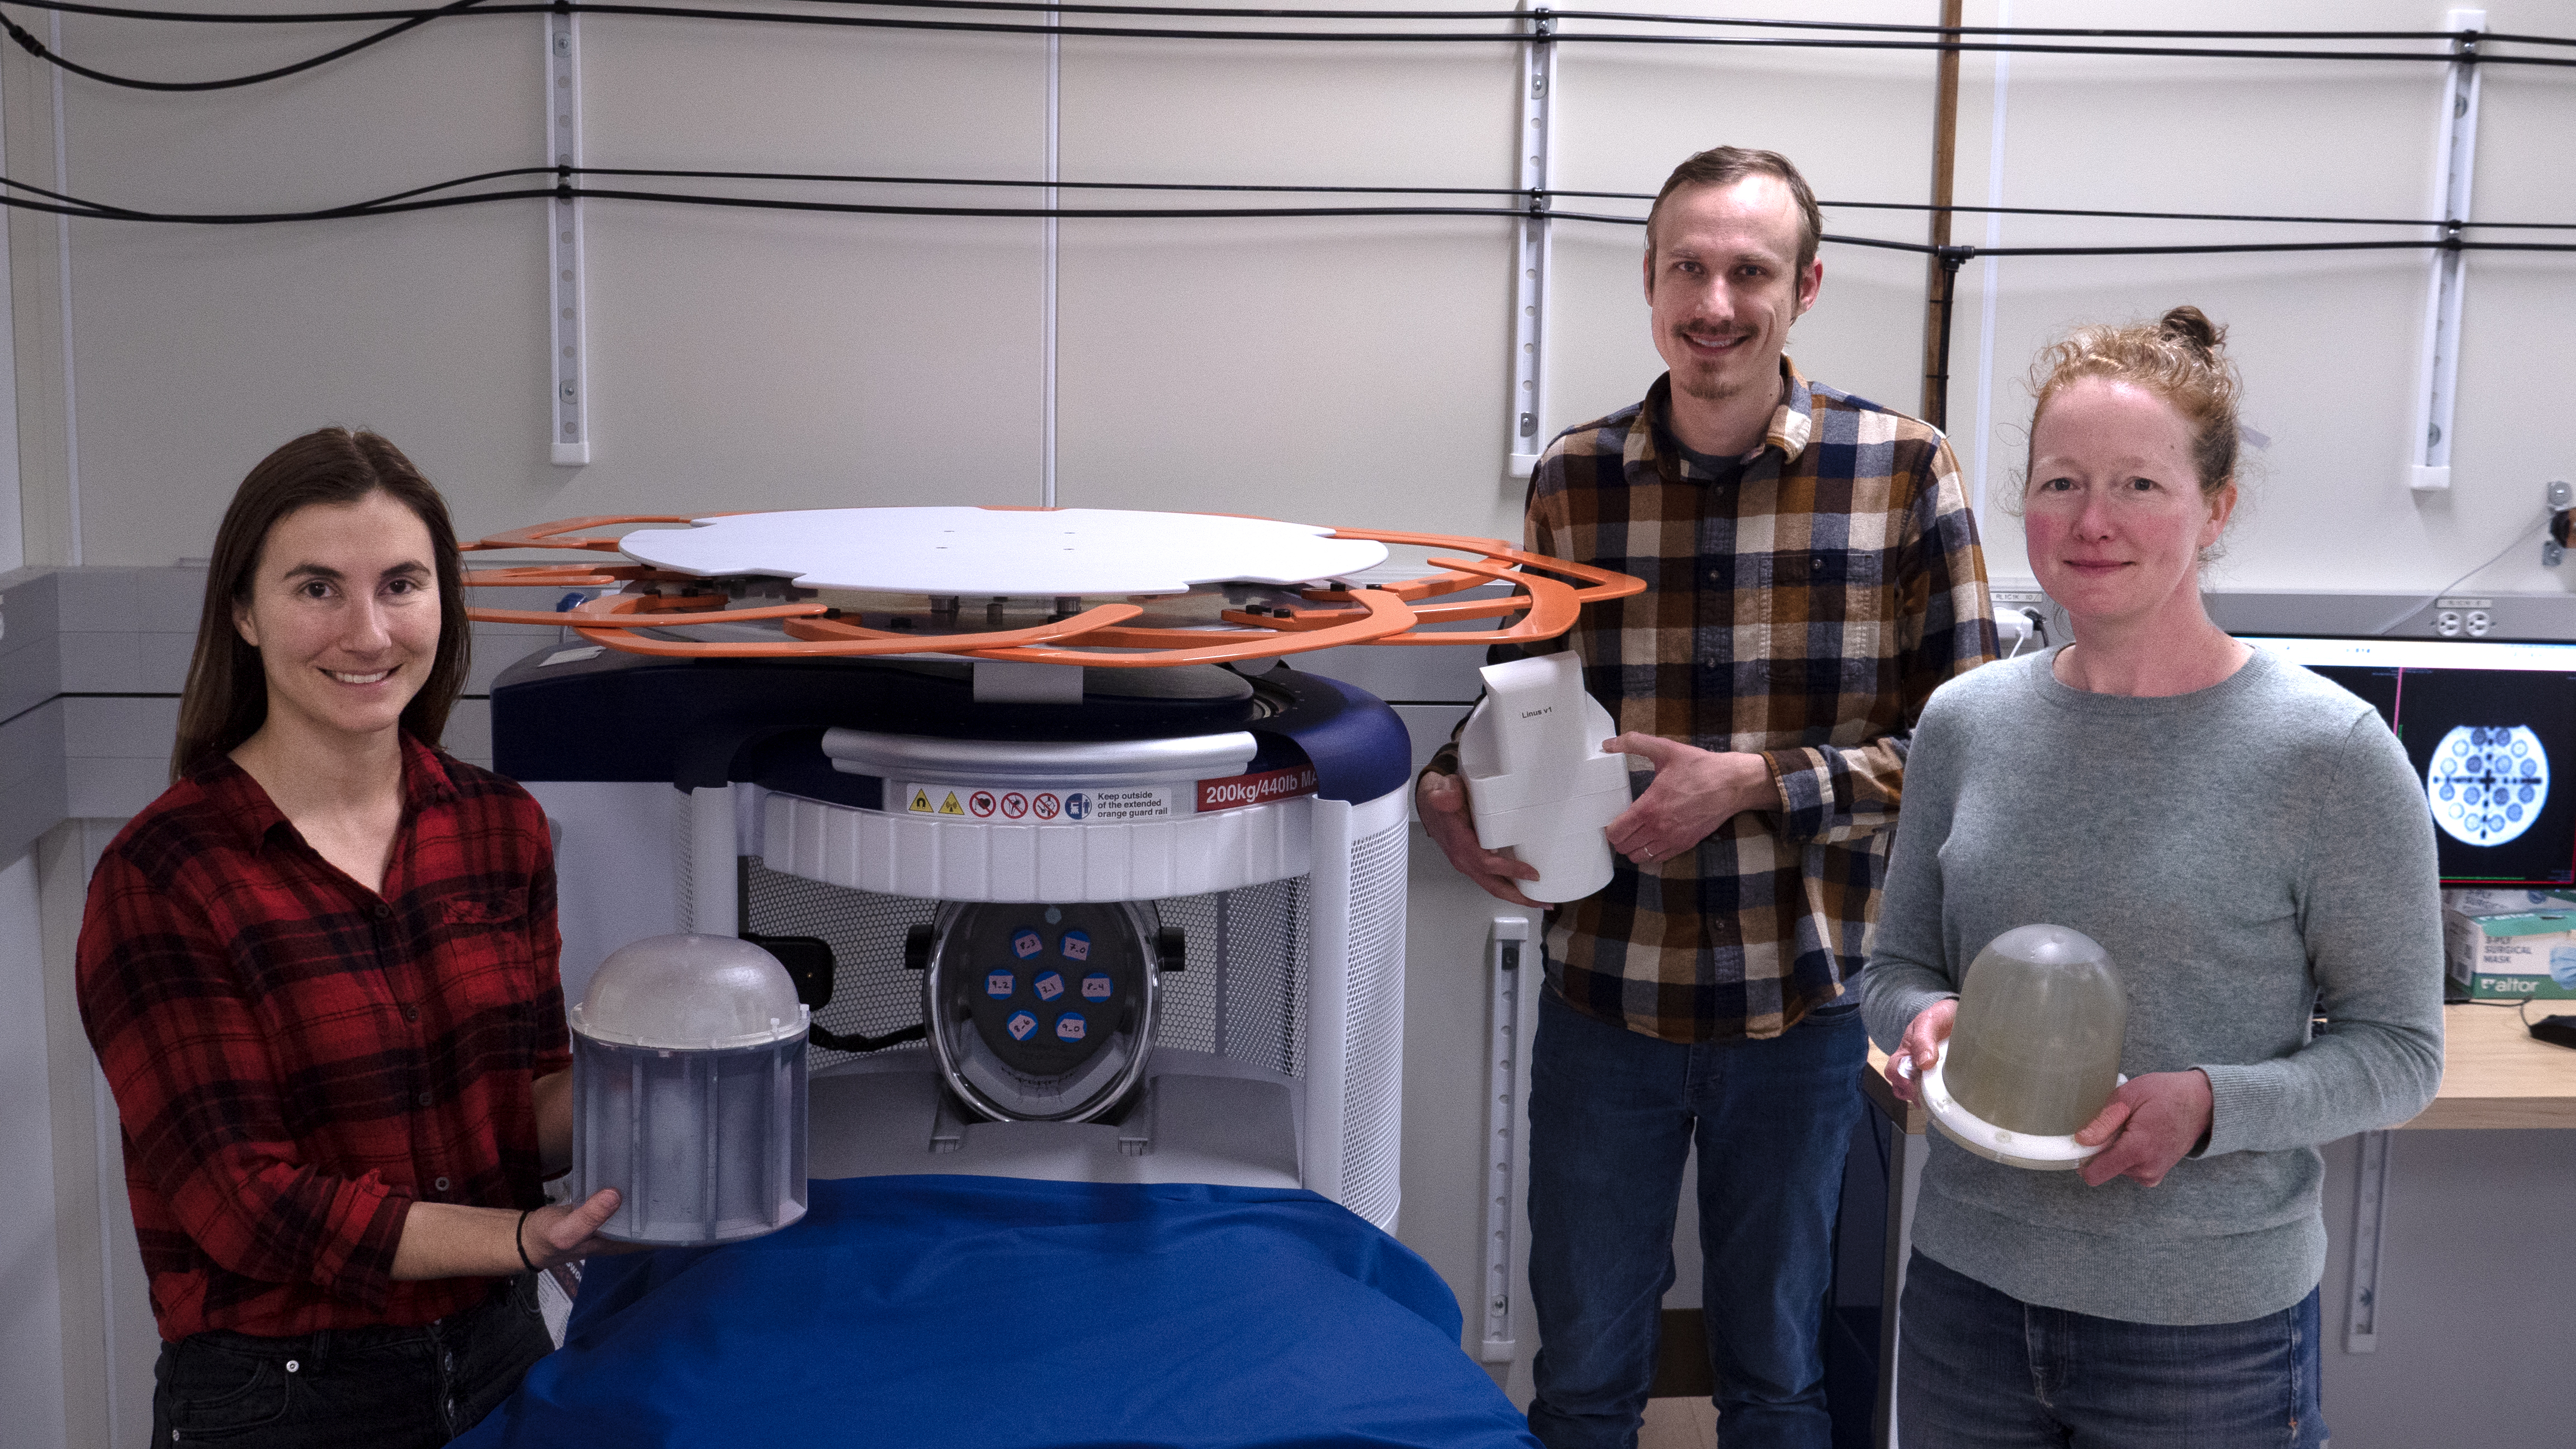 Three casually dressed researchers stand smiling around an MRI machine, each holding a different device used in their experiments.